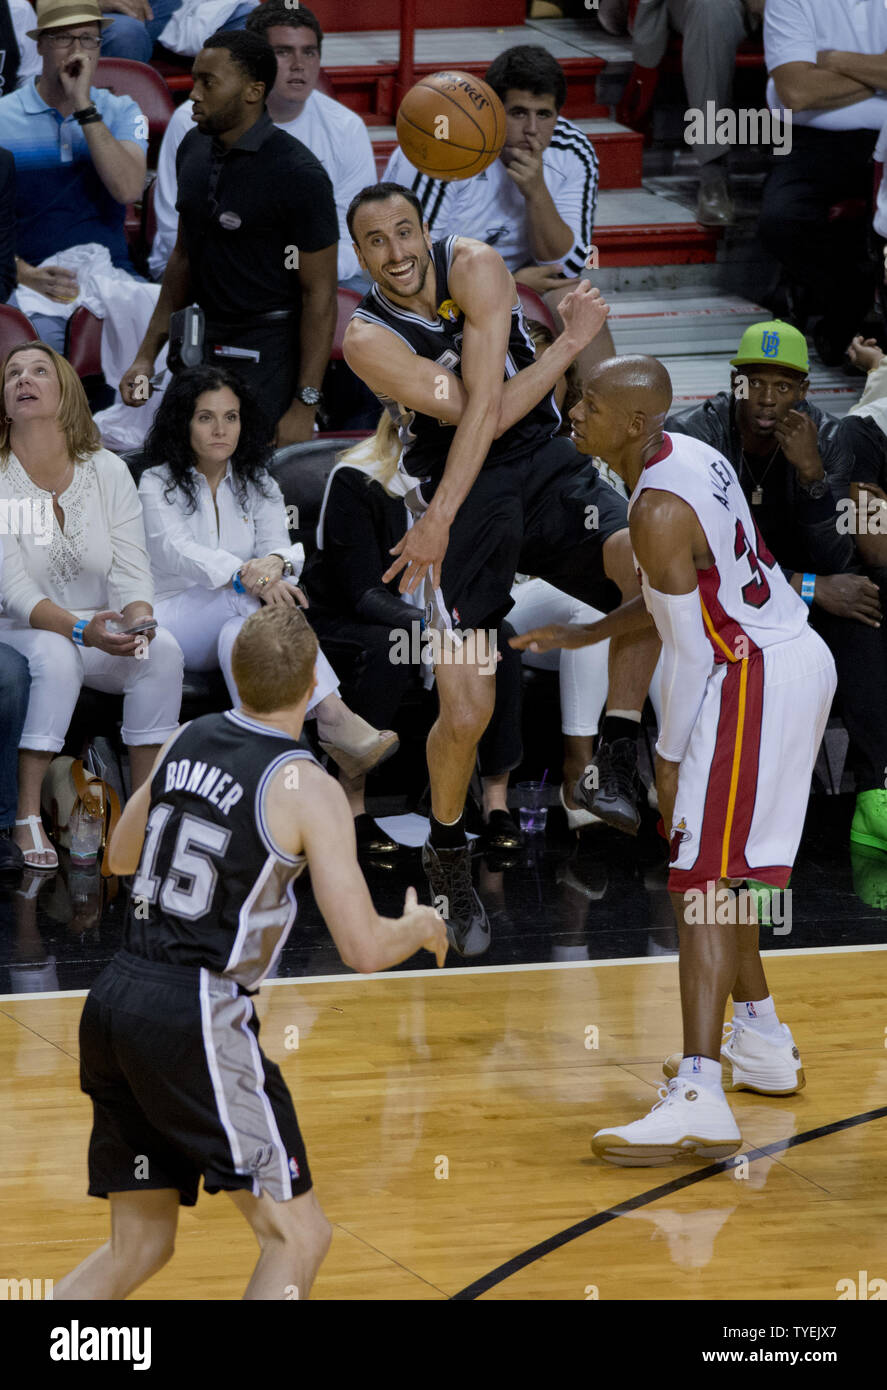 San Antonio Spurs Manu Ginobili (20) passes to Matt Bonner (15) as Miami Heat guard Ray Allen (34) looks on in game 4 of the NBA Finals at the American Airlines Arena, in Miami, June 12, 2014. The Spurs defeated the Heat 107-86 to take a 3-1 game lead in the best of seven games. UPI/Gary I Rothstein Stock Photo